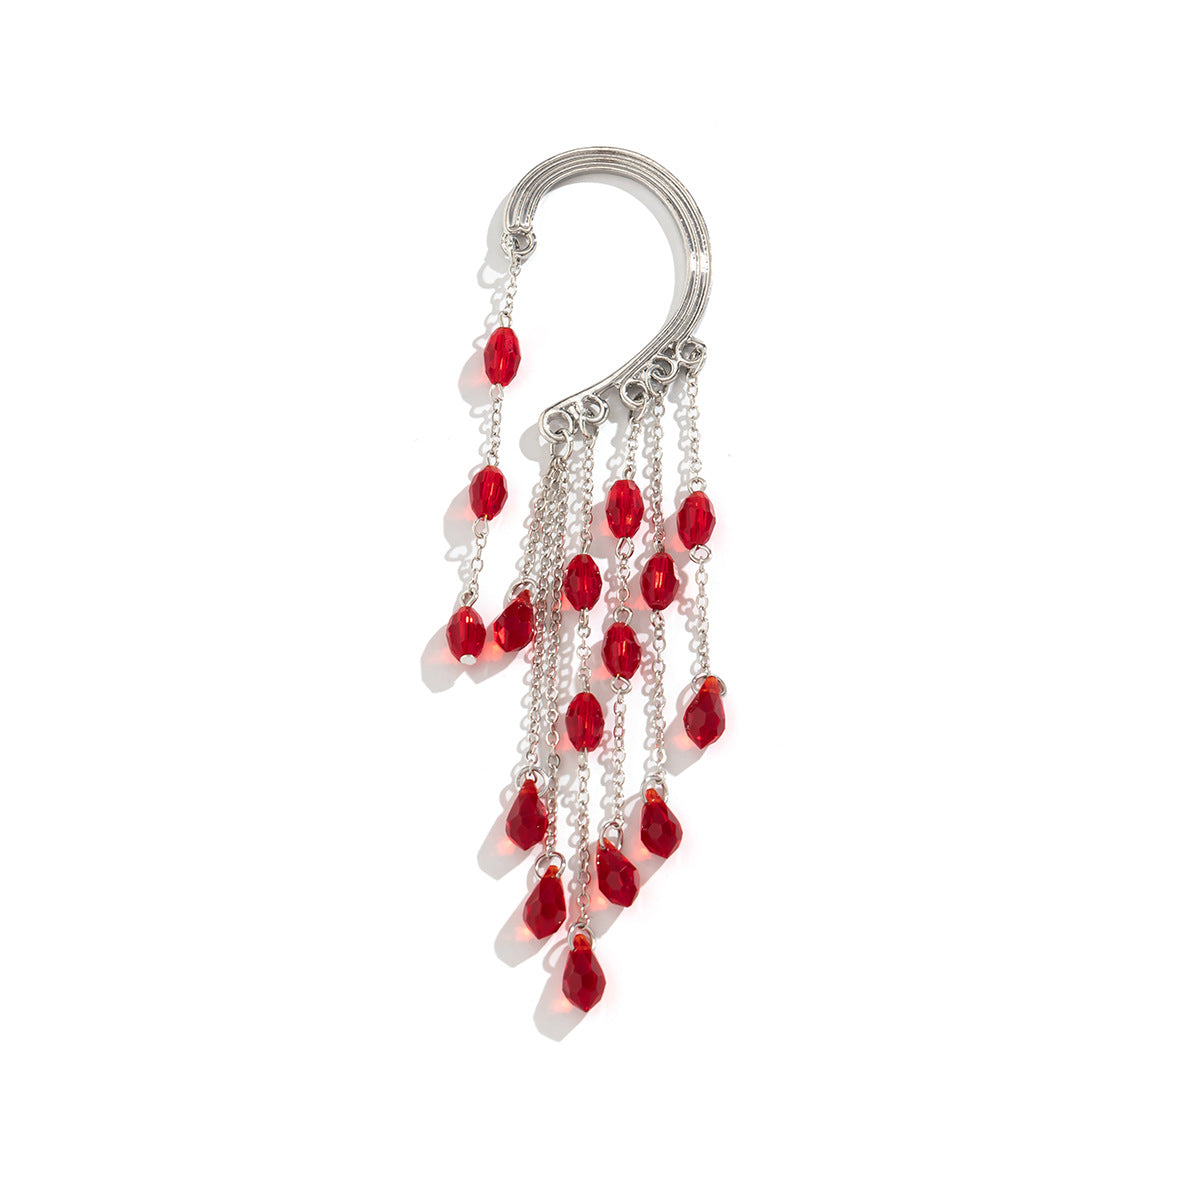 Blood Drop Tassel Earrings with Crystal Pendant and Gothic Flair